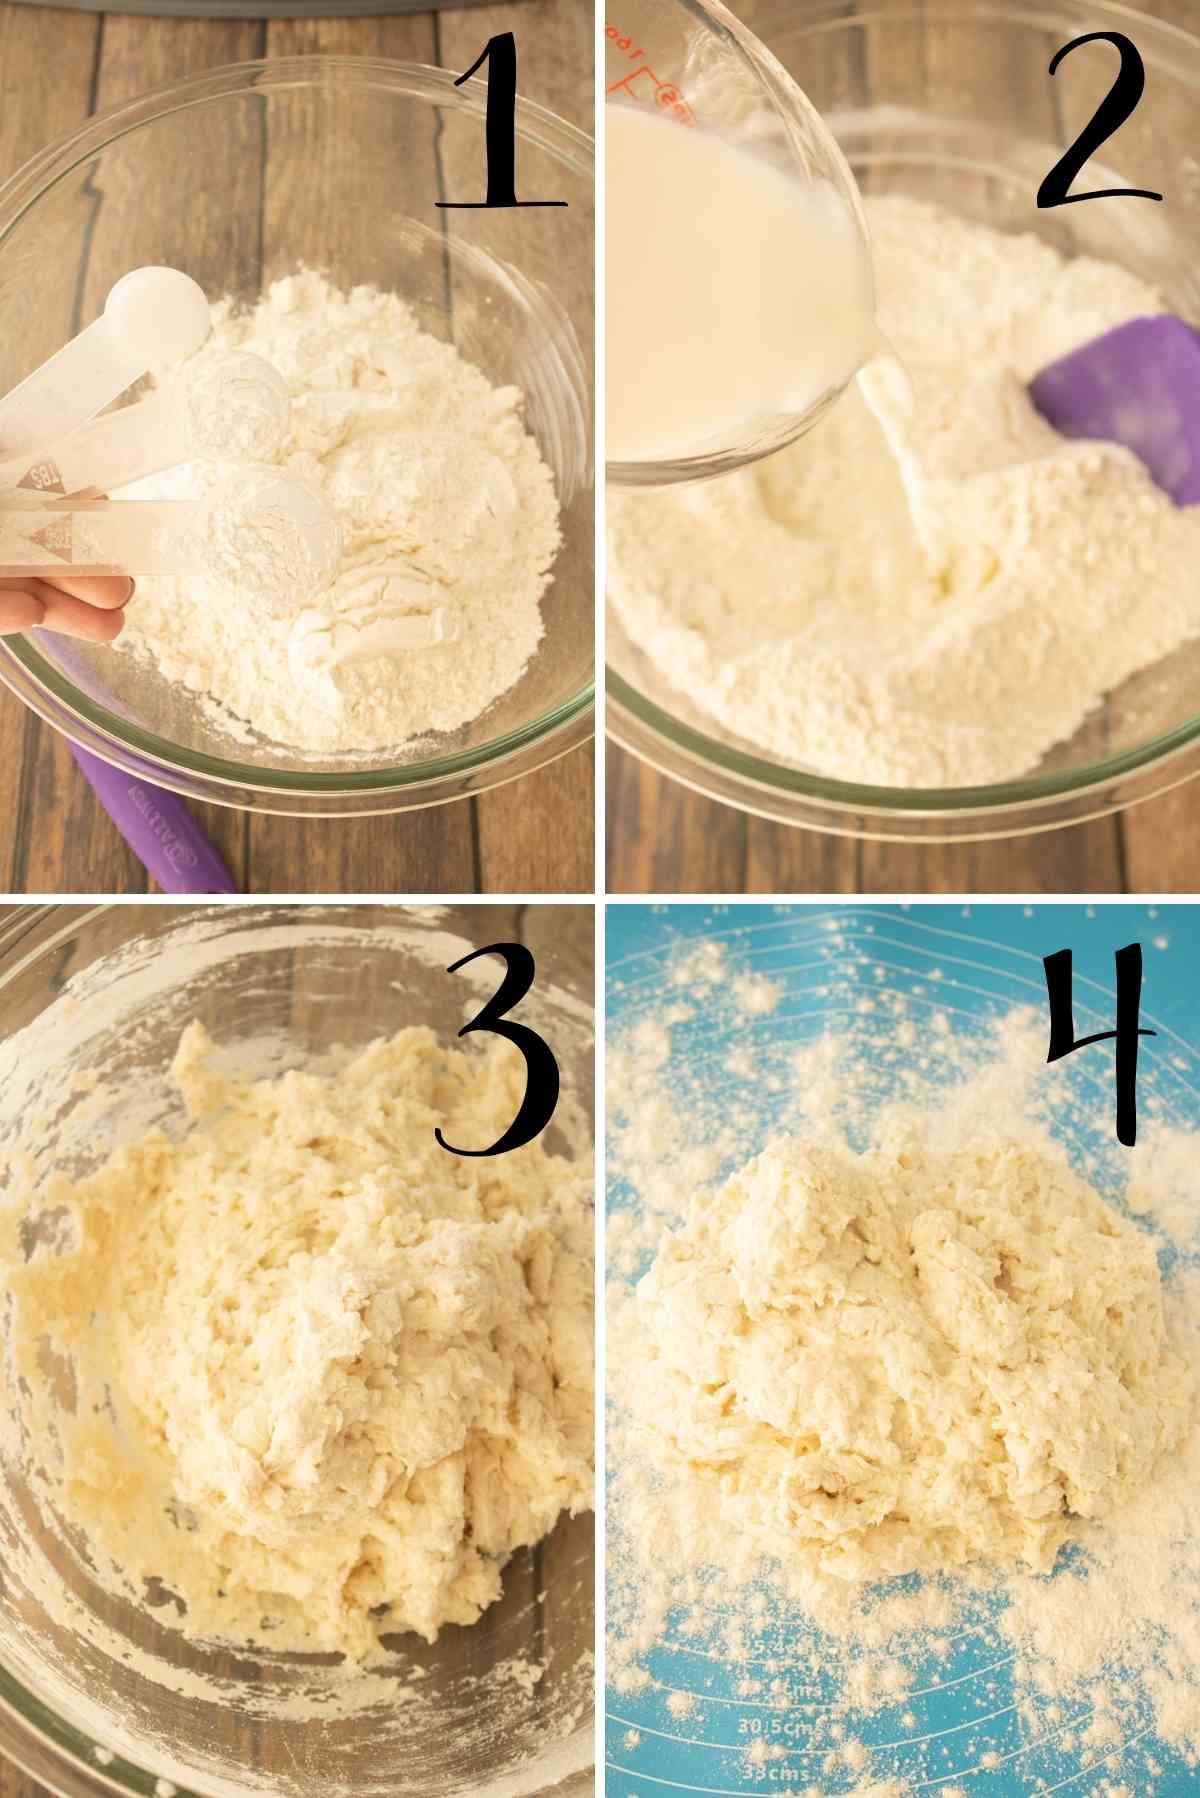 This simple dough is just flour, baking powder and salt!